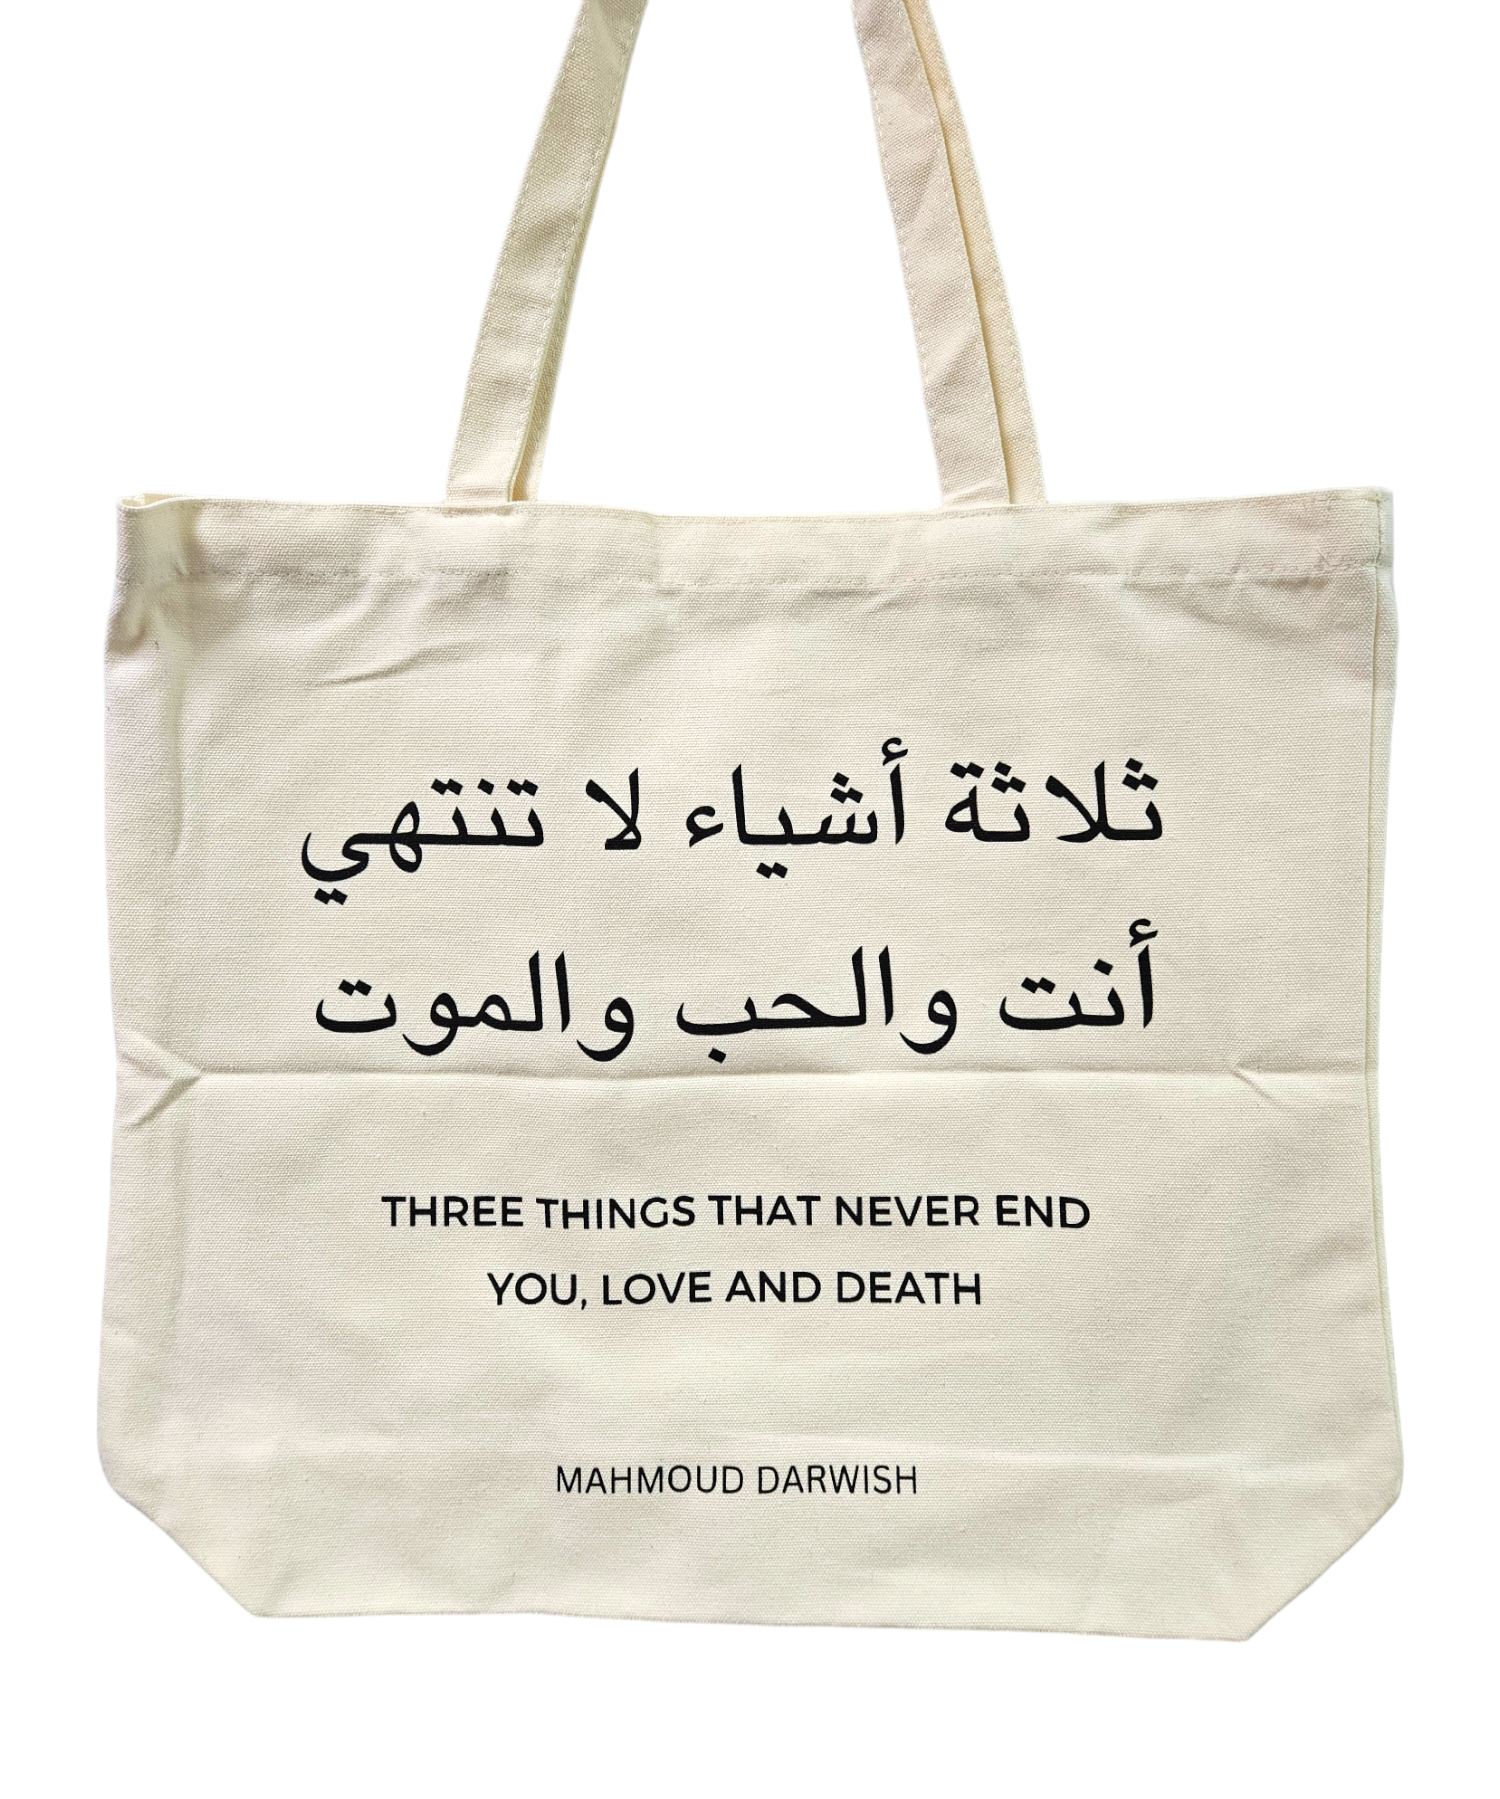 "Three Things That Never End, You, Love and Death" Canvas Tote Bag - Mahmoud Darwish